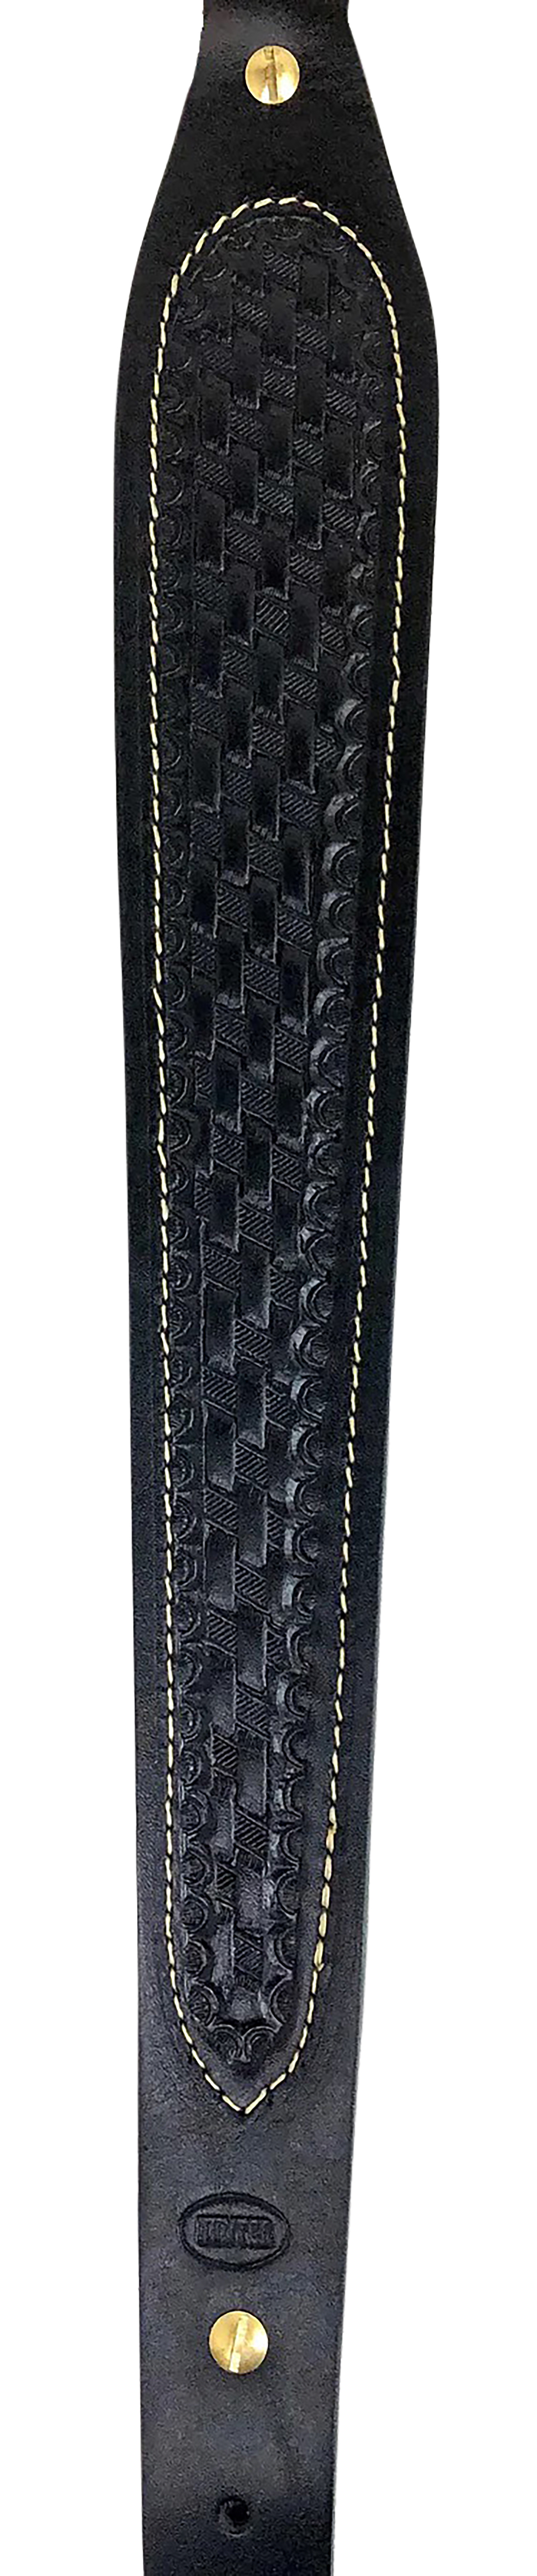 Hunter Company 027-138-01 Cobra  Black Leather/Suede with Basket Weave Design for Rifle